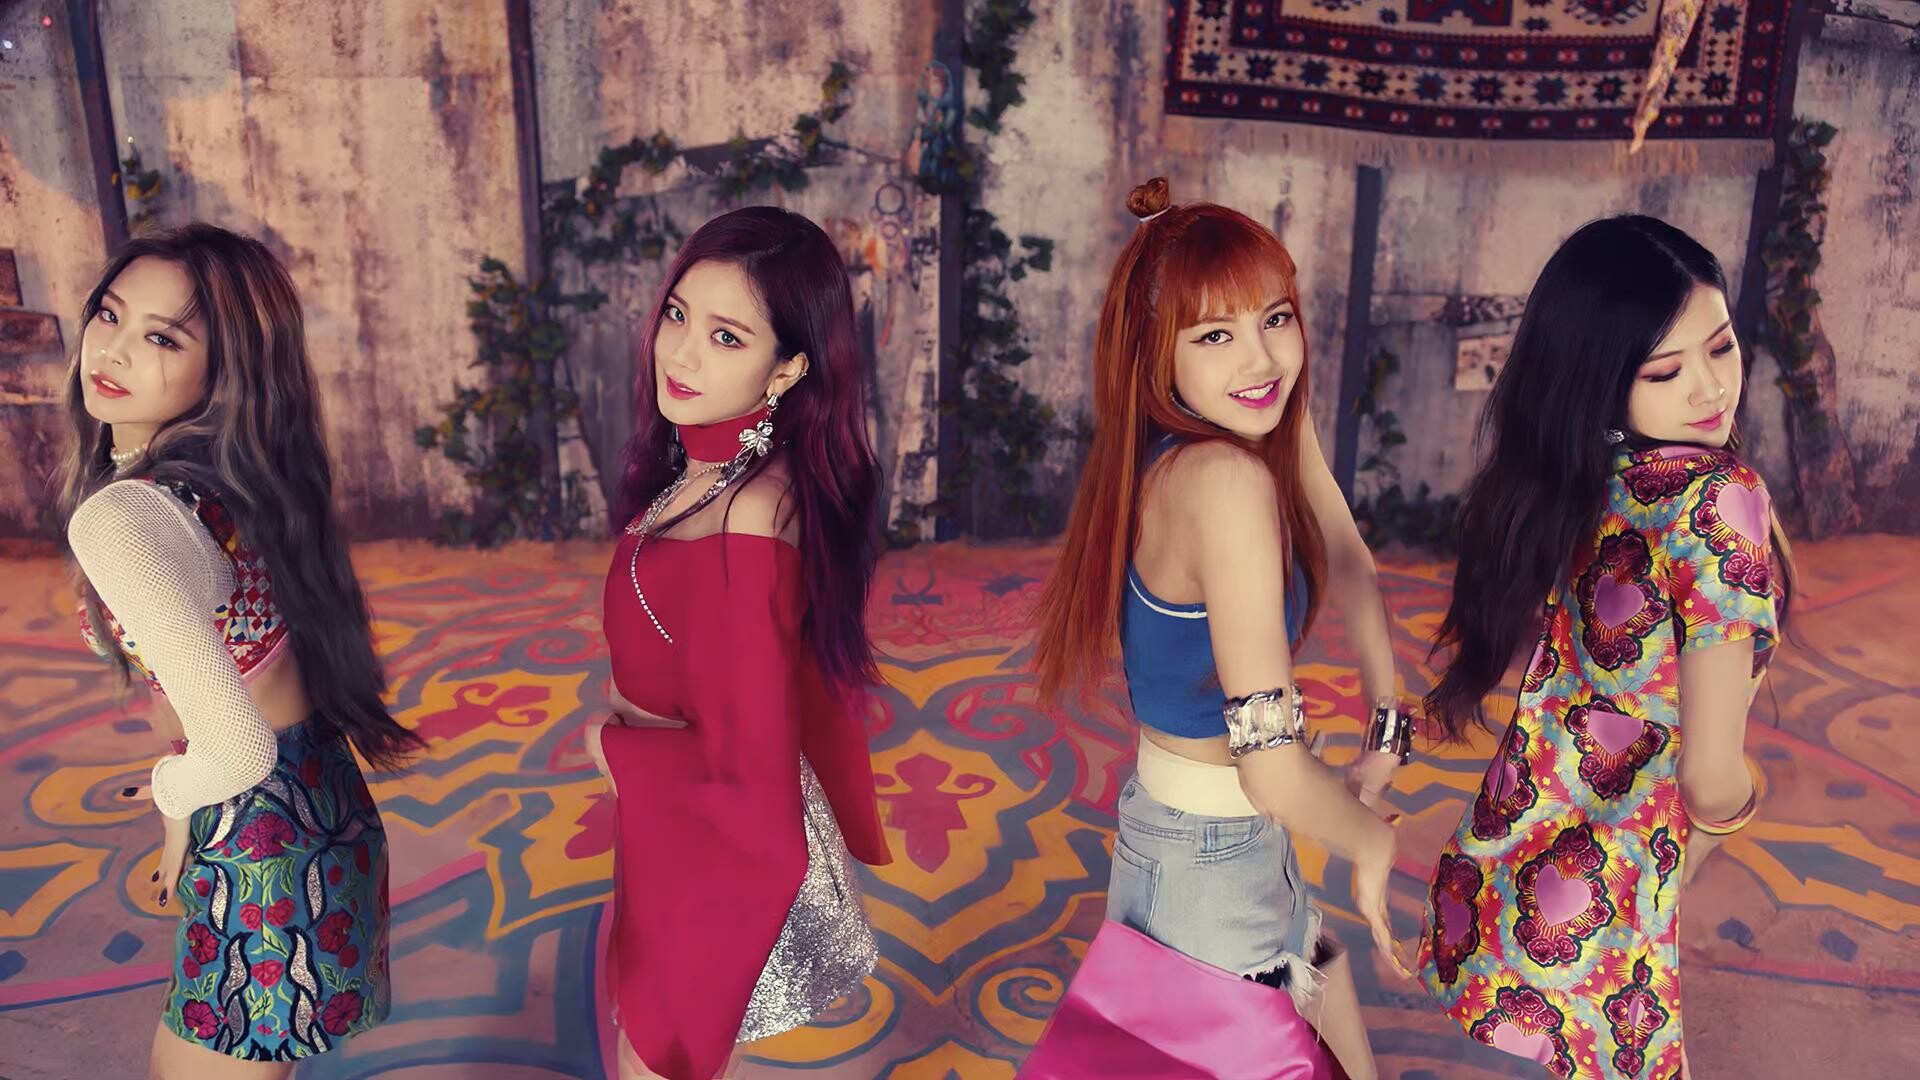 BLACKPINK: The group released their first standalone digital single, "As If It's Your Last", on June 22. 1920x1080 Full HD Background.